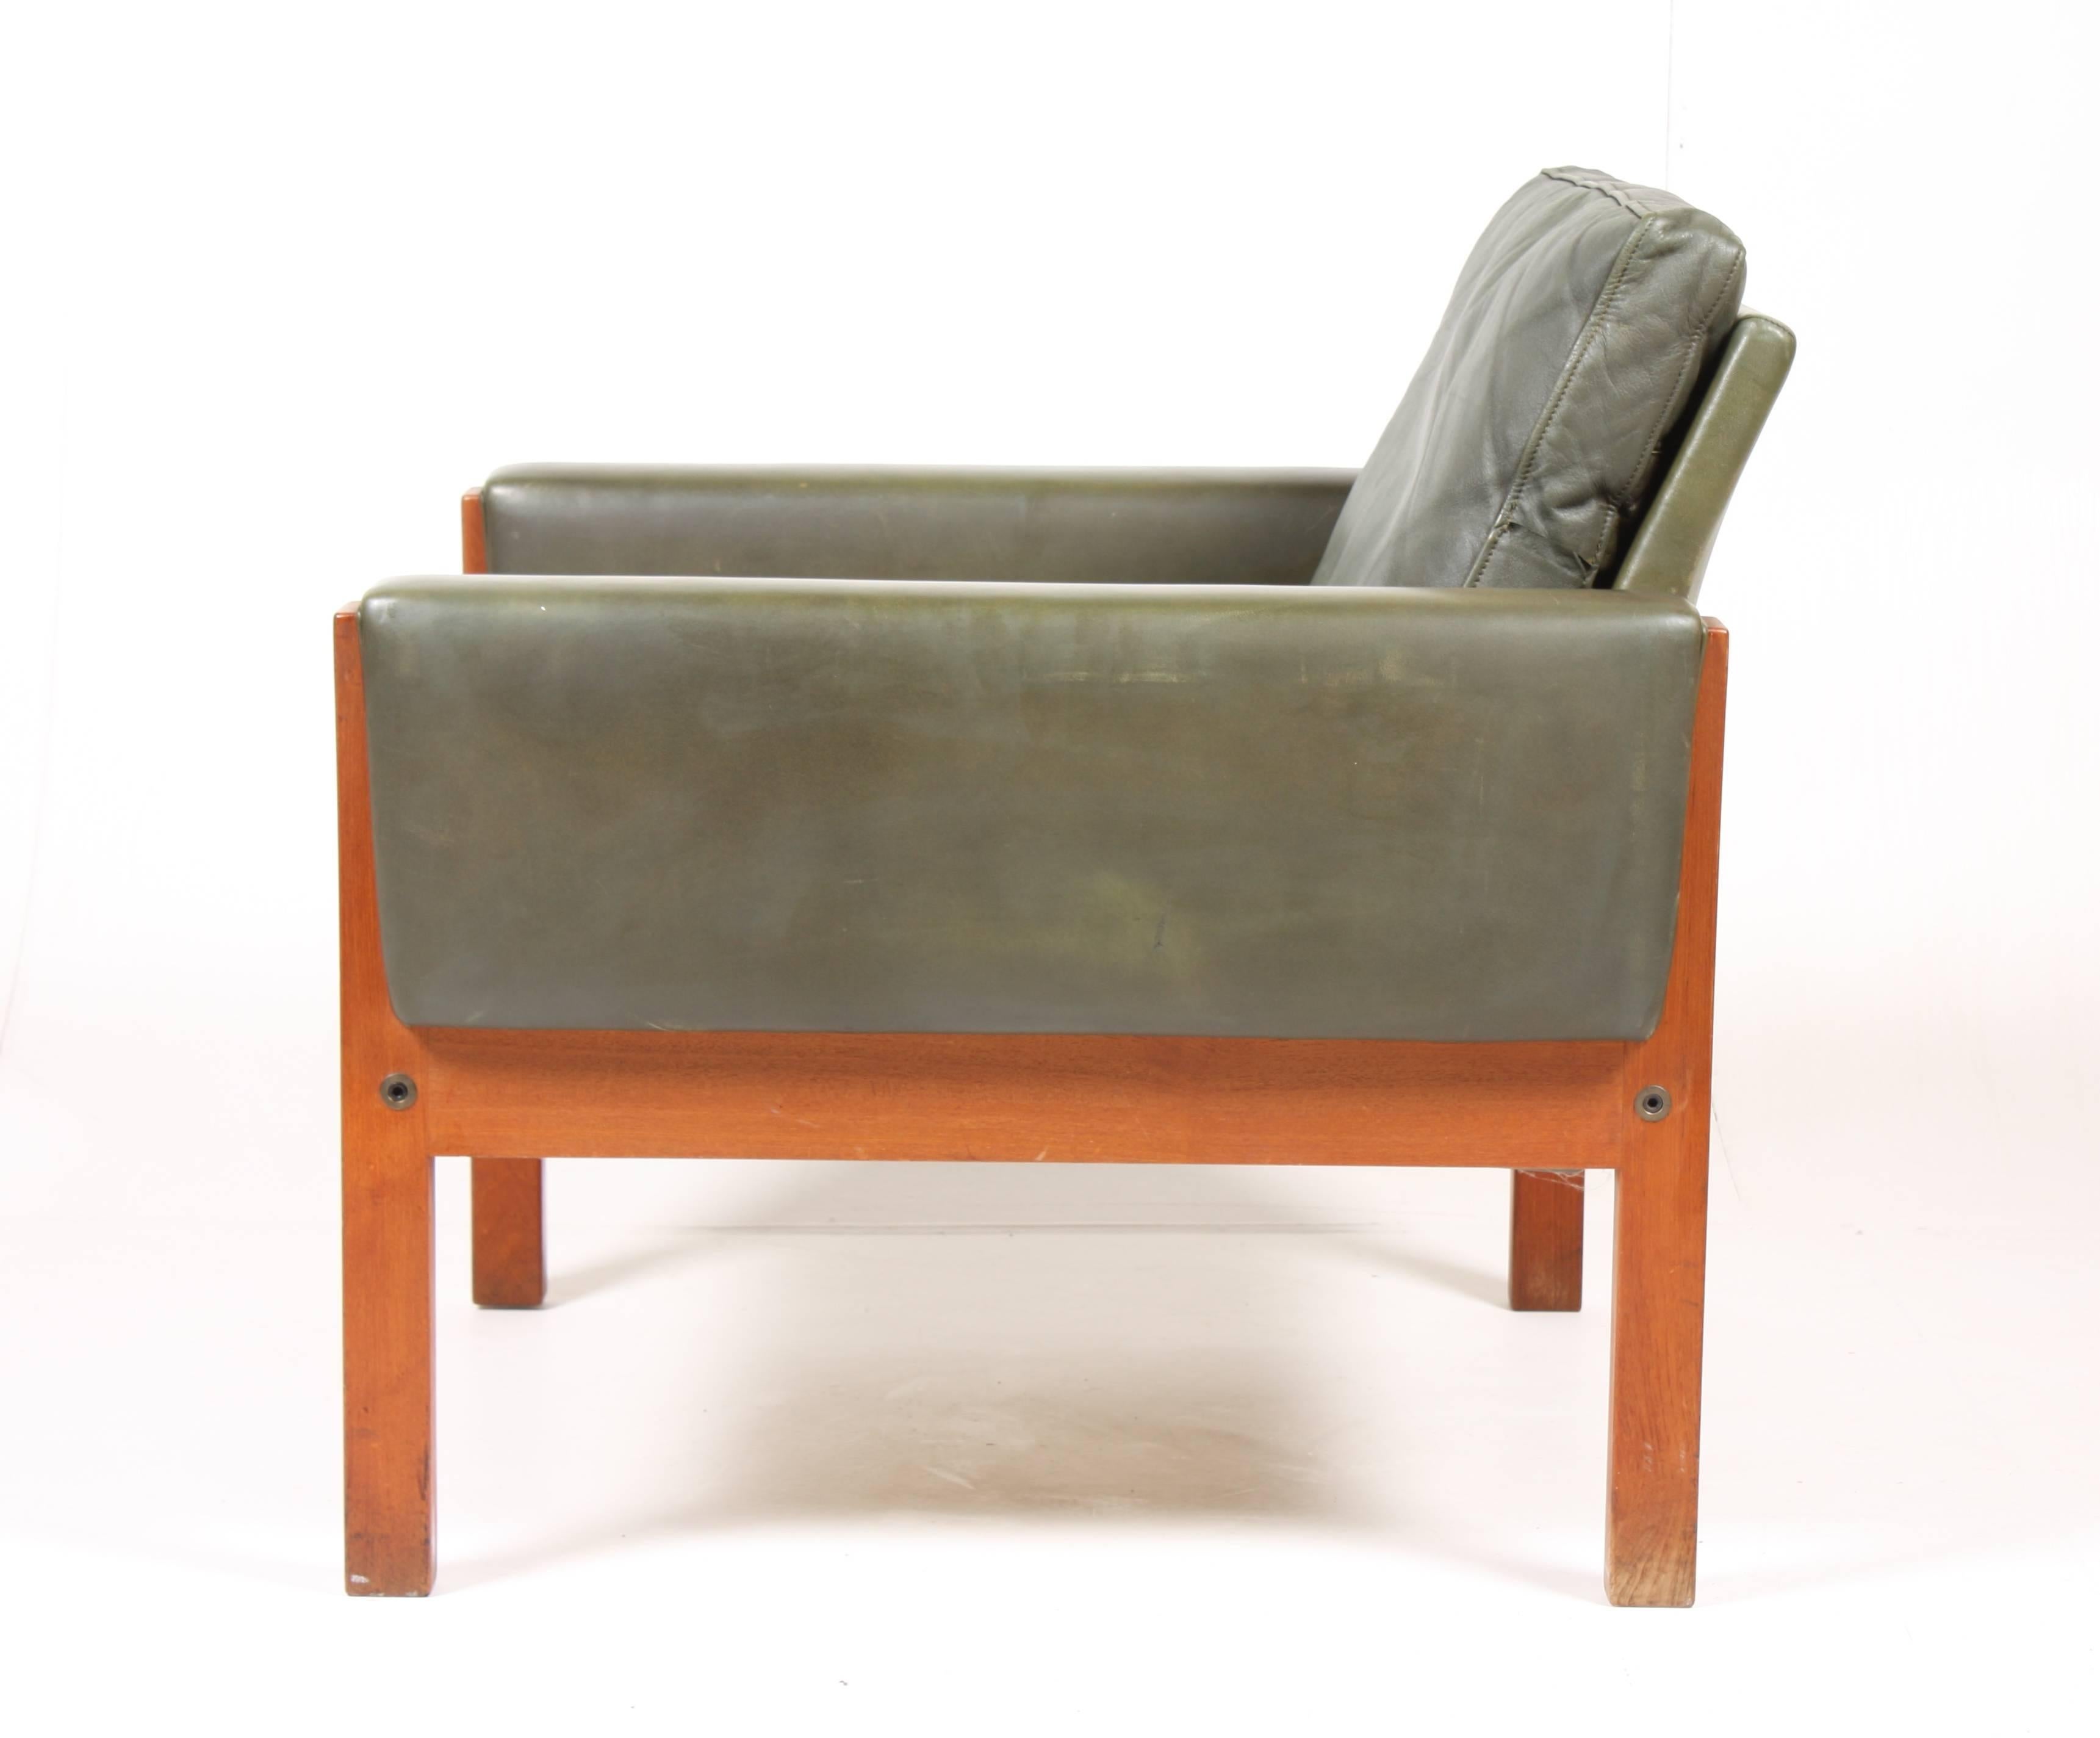 Pair of very comfortable lounge chairs in patinated green leather and teak designed by Maa. Hans J Wegner for AP Stolen ( Anker Petersen ) in 1960. 
Very nice original condition.